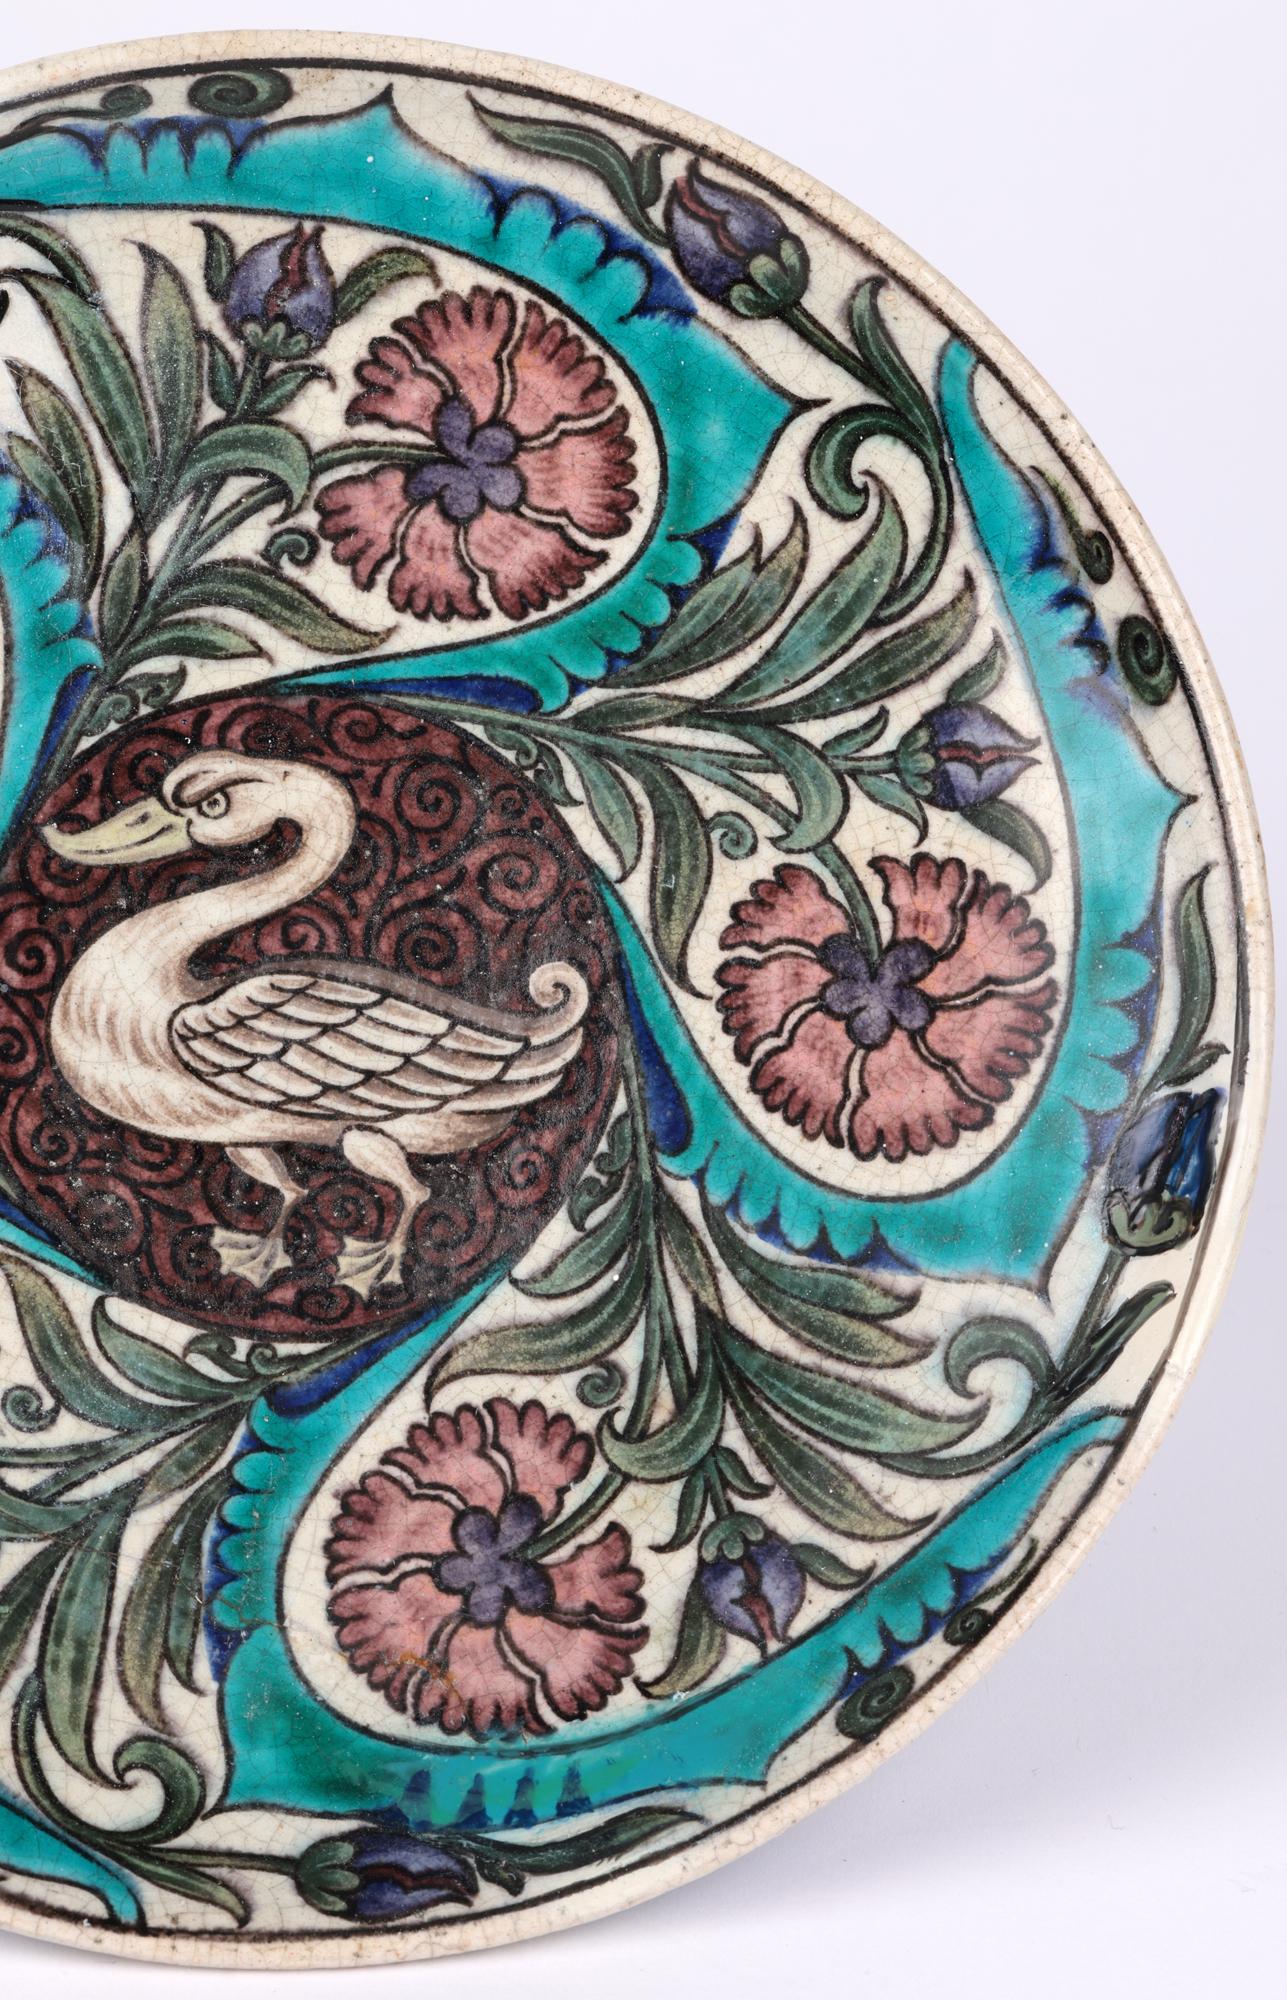 Rare Arts & Crafts Earthenware Persian Style Dish Hand Painted with a Swan 2